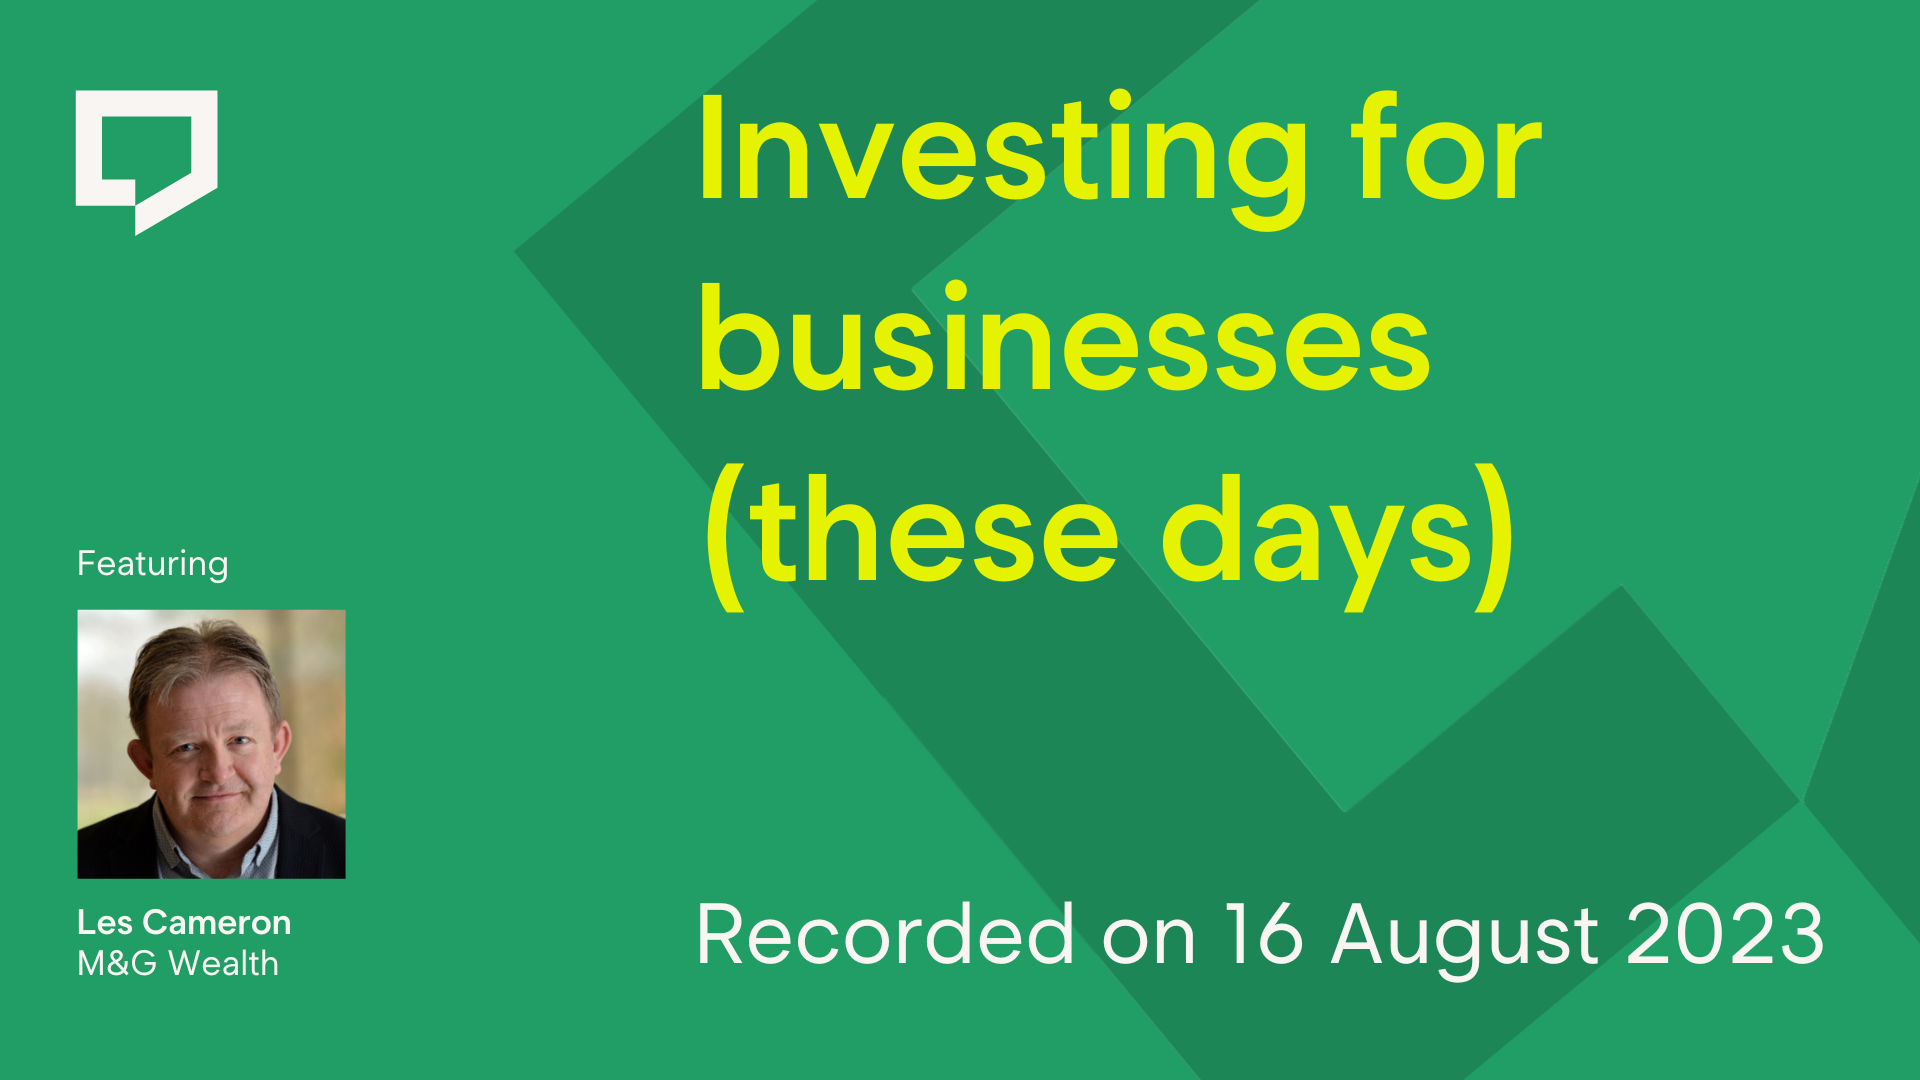 Video cover reads 'Investing for businesses these days. Recorded on 16 August 2023. Featuring Les Cameron of M&G Wealth.'